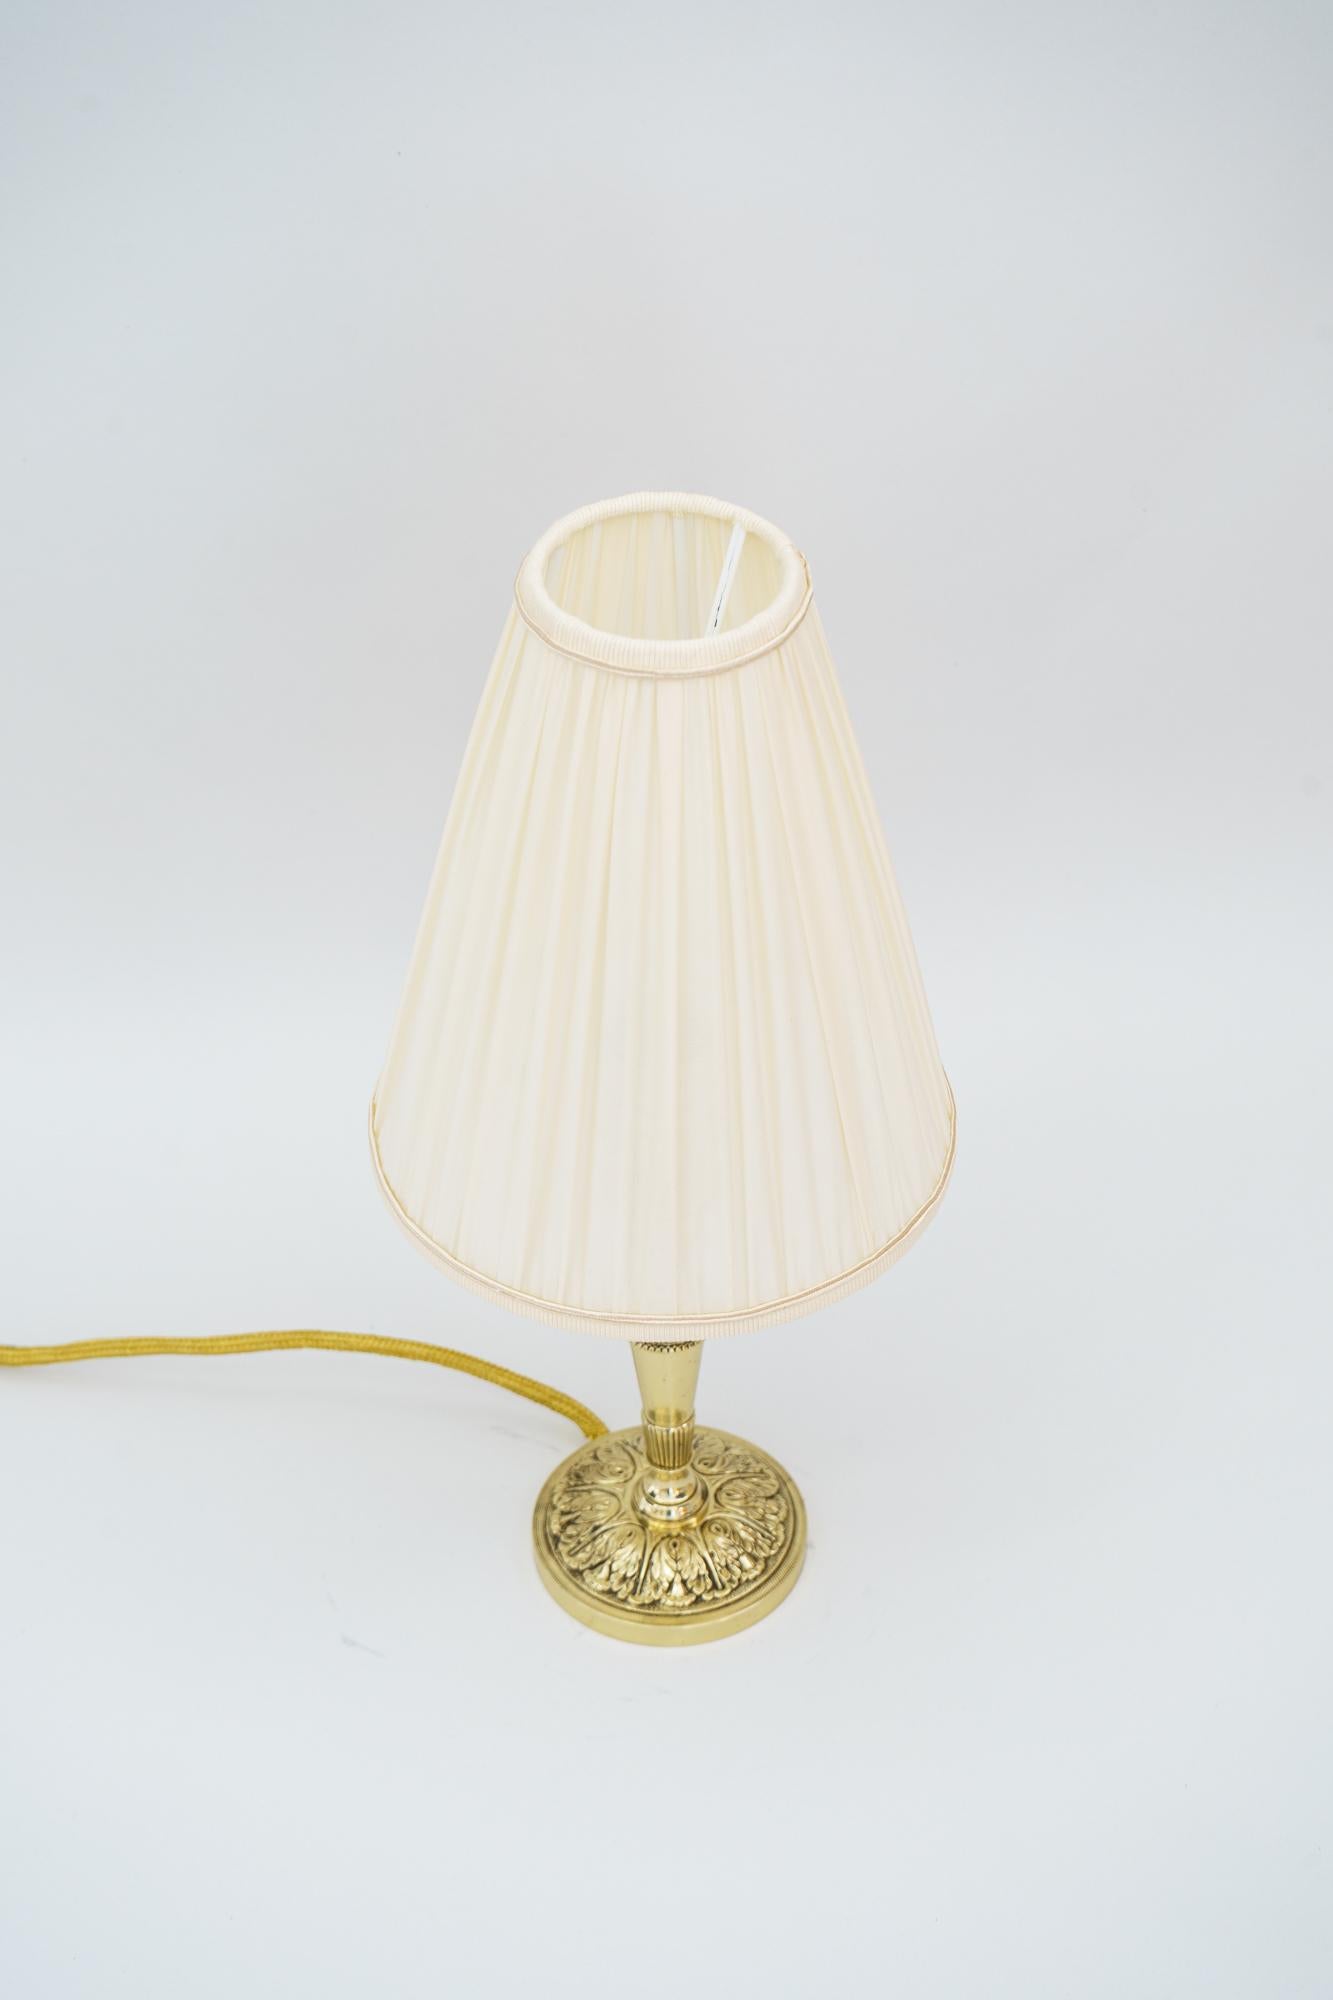 Art Deco table lamp, Vienna, circa 1920s
Polished and stove enameled
Shade replaced (new).